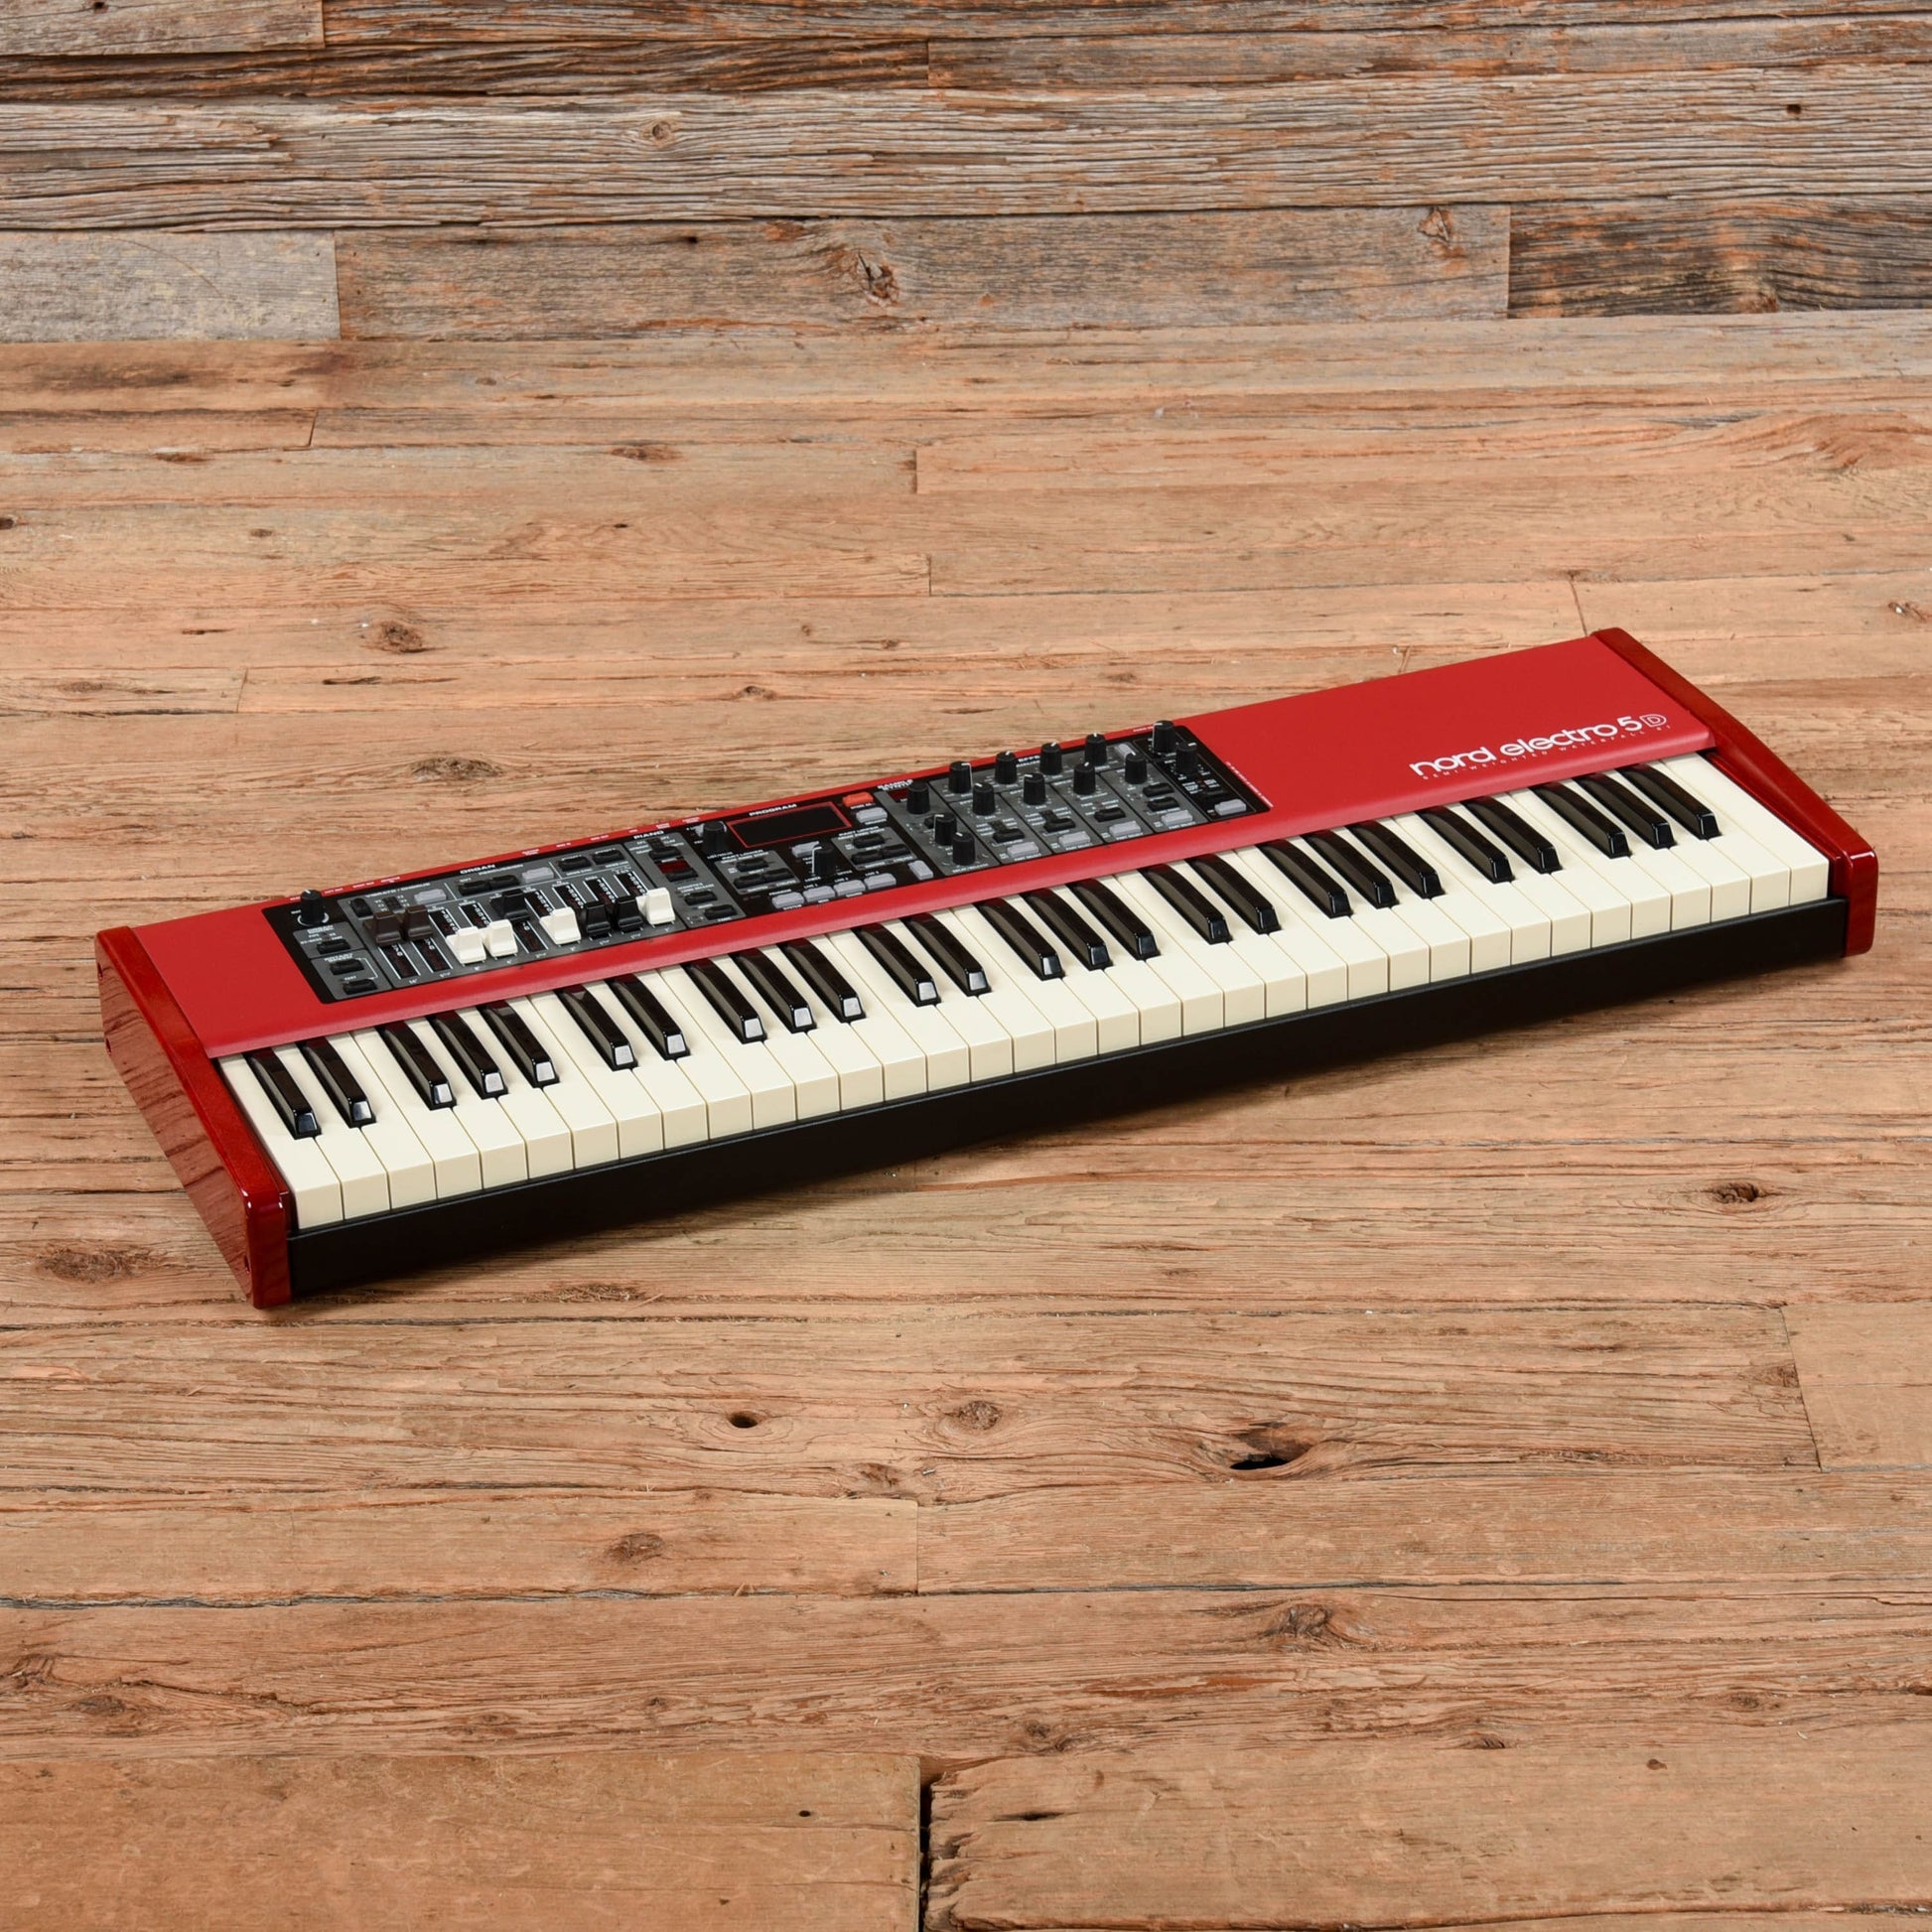 Nord Electro 5 D 61SW Keyboards and Synths / Electric Pianos